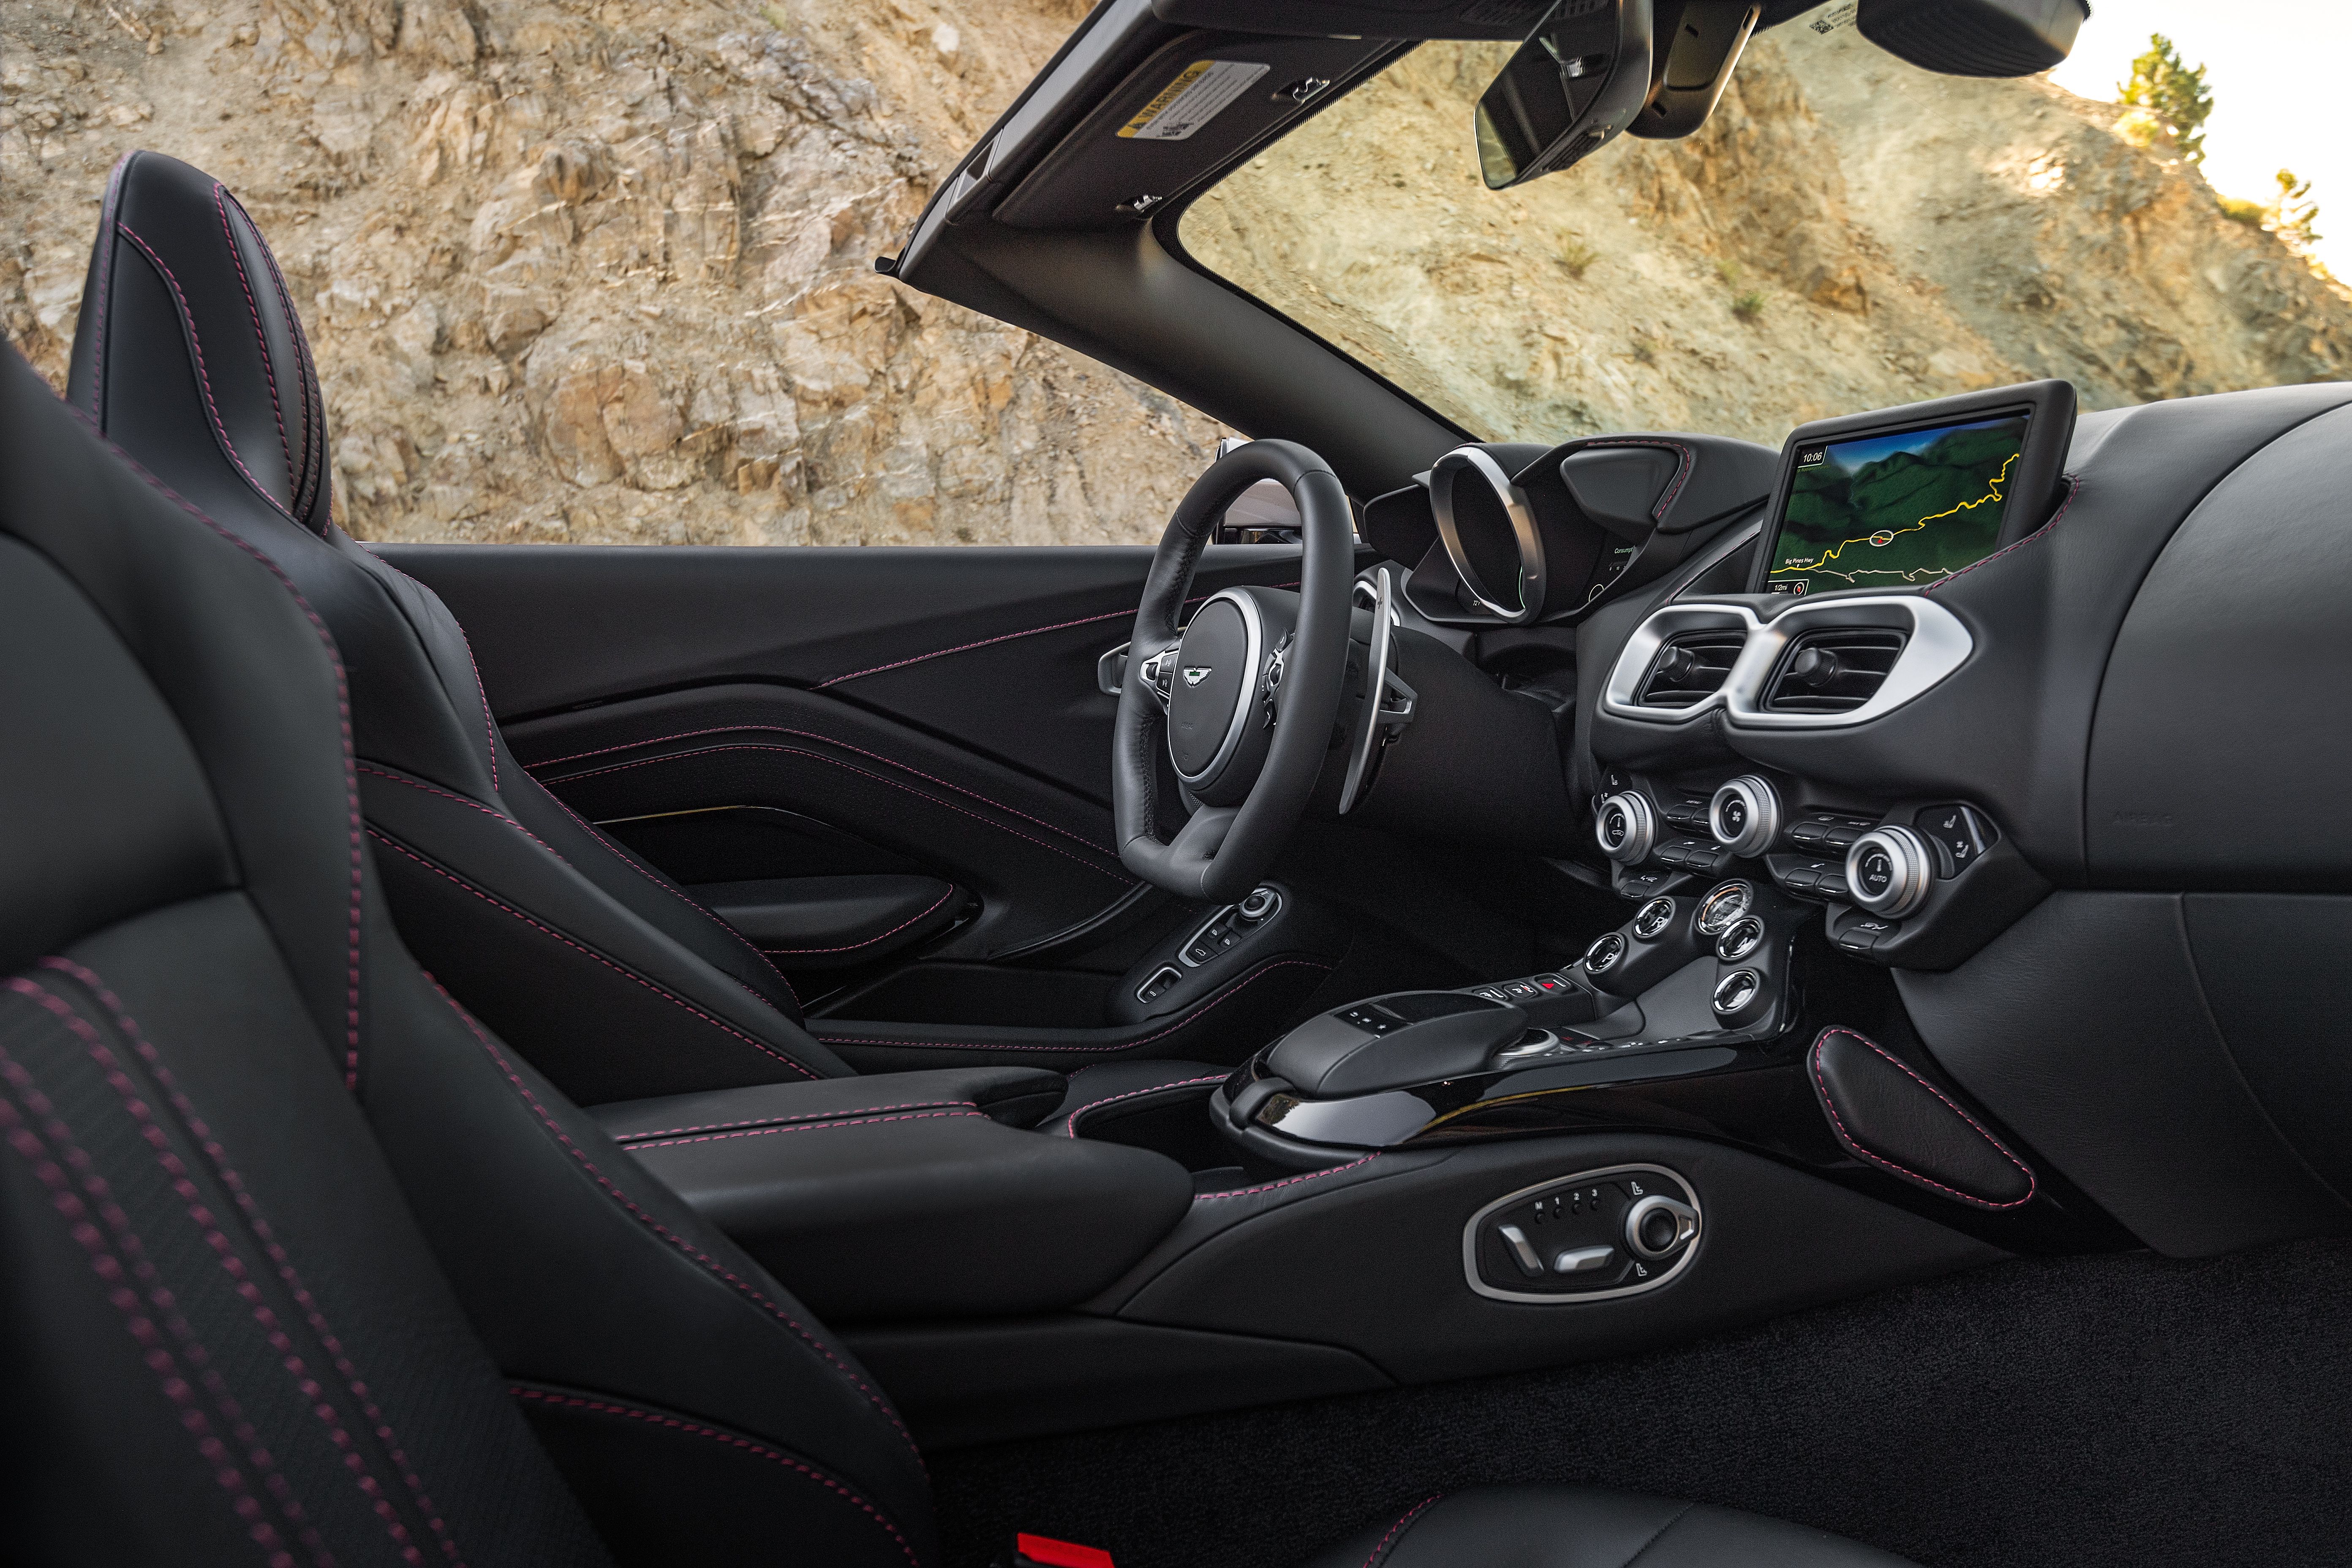 The Vantage's interior from the passenger side